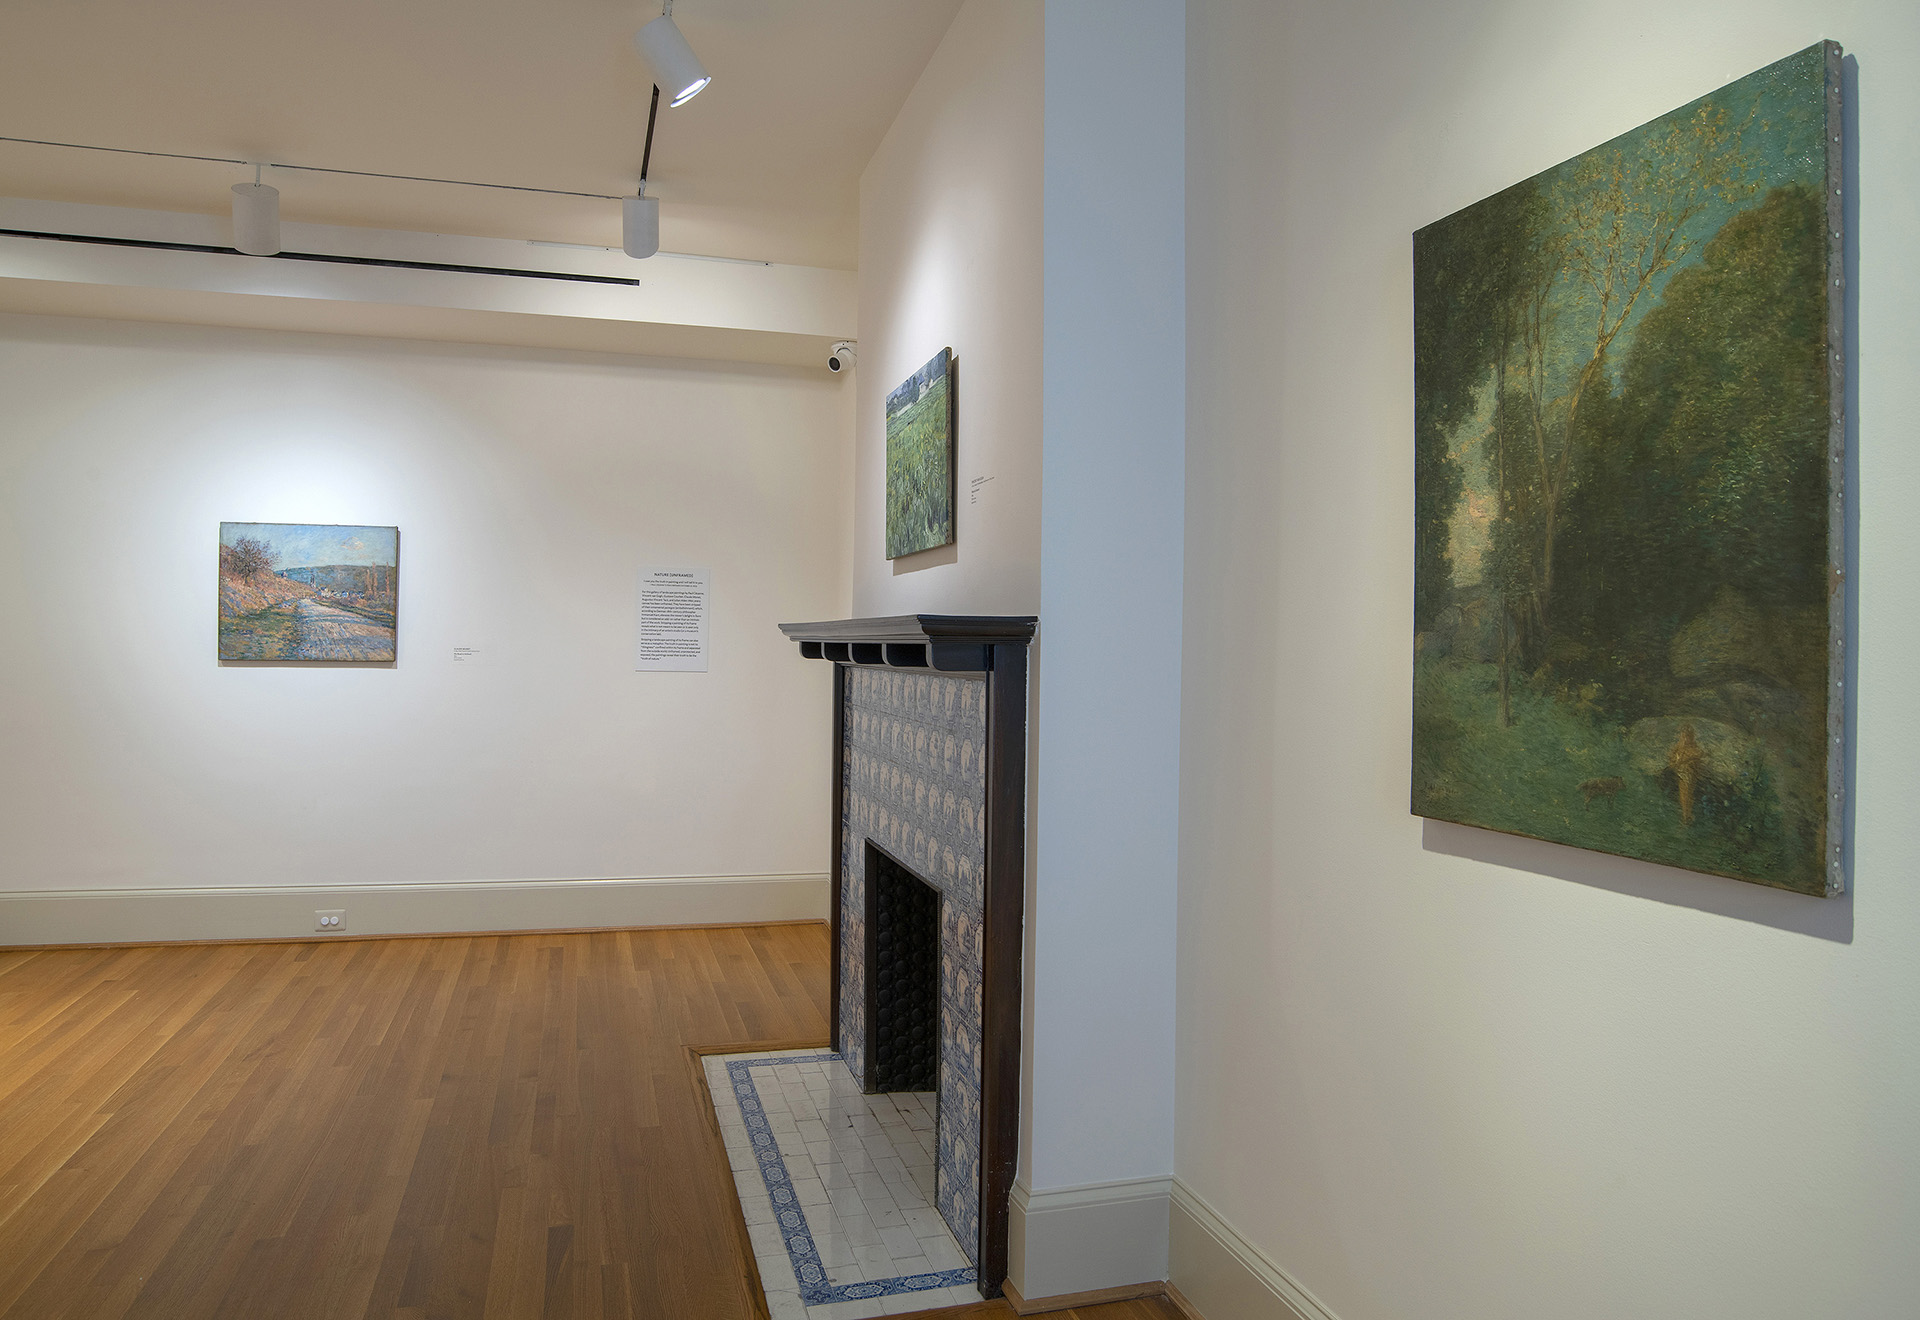 installation view of unframed paintings